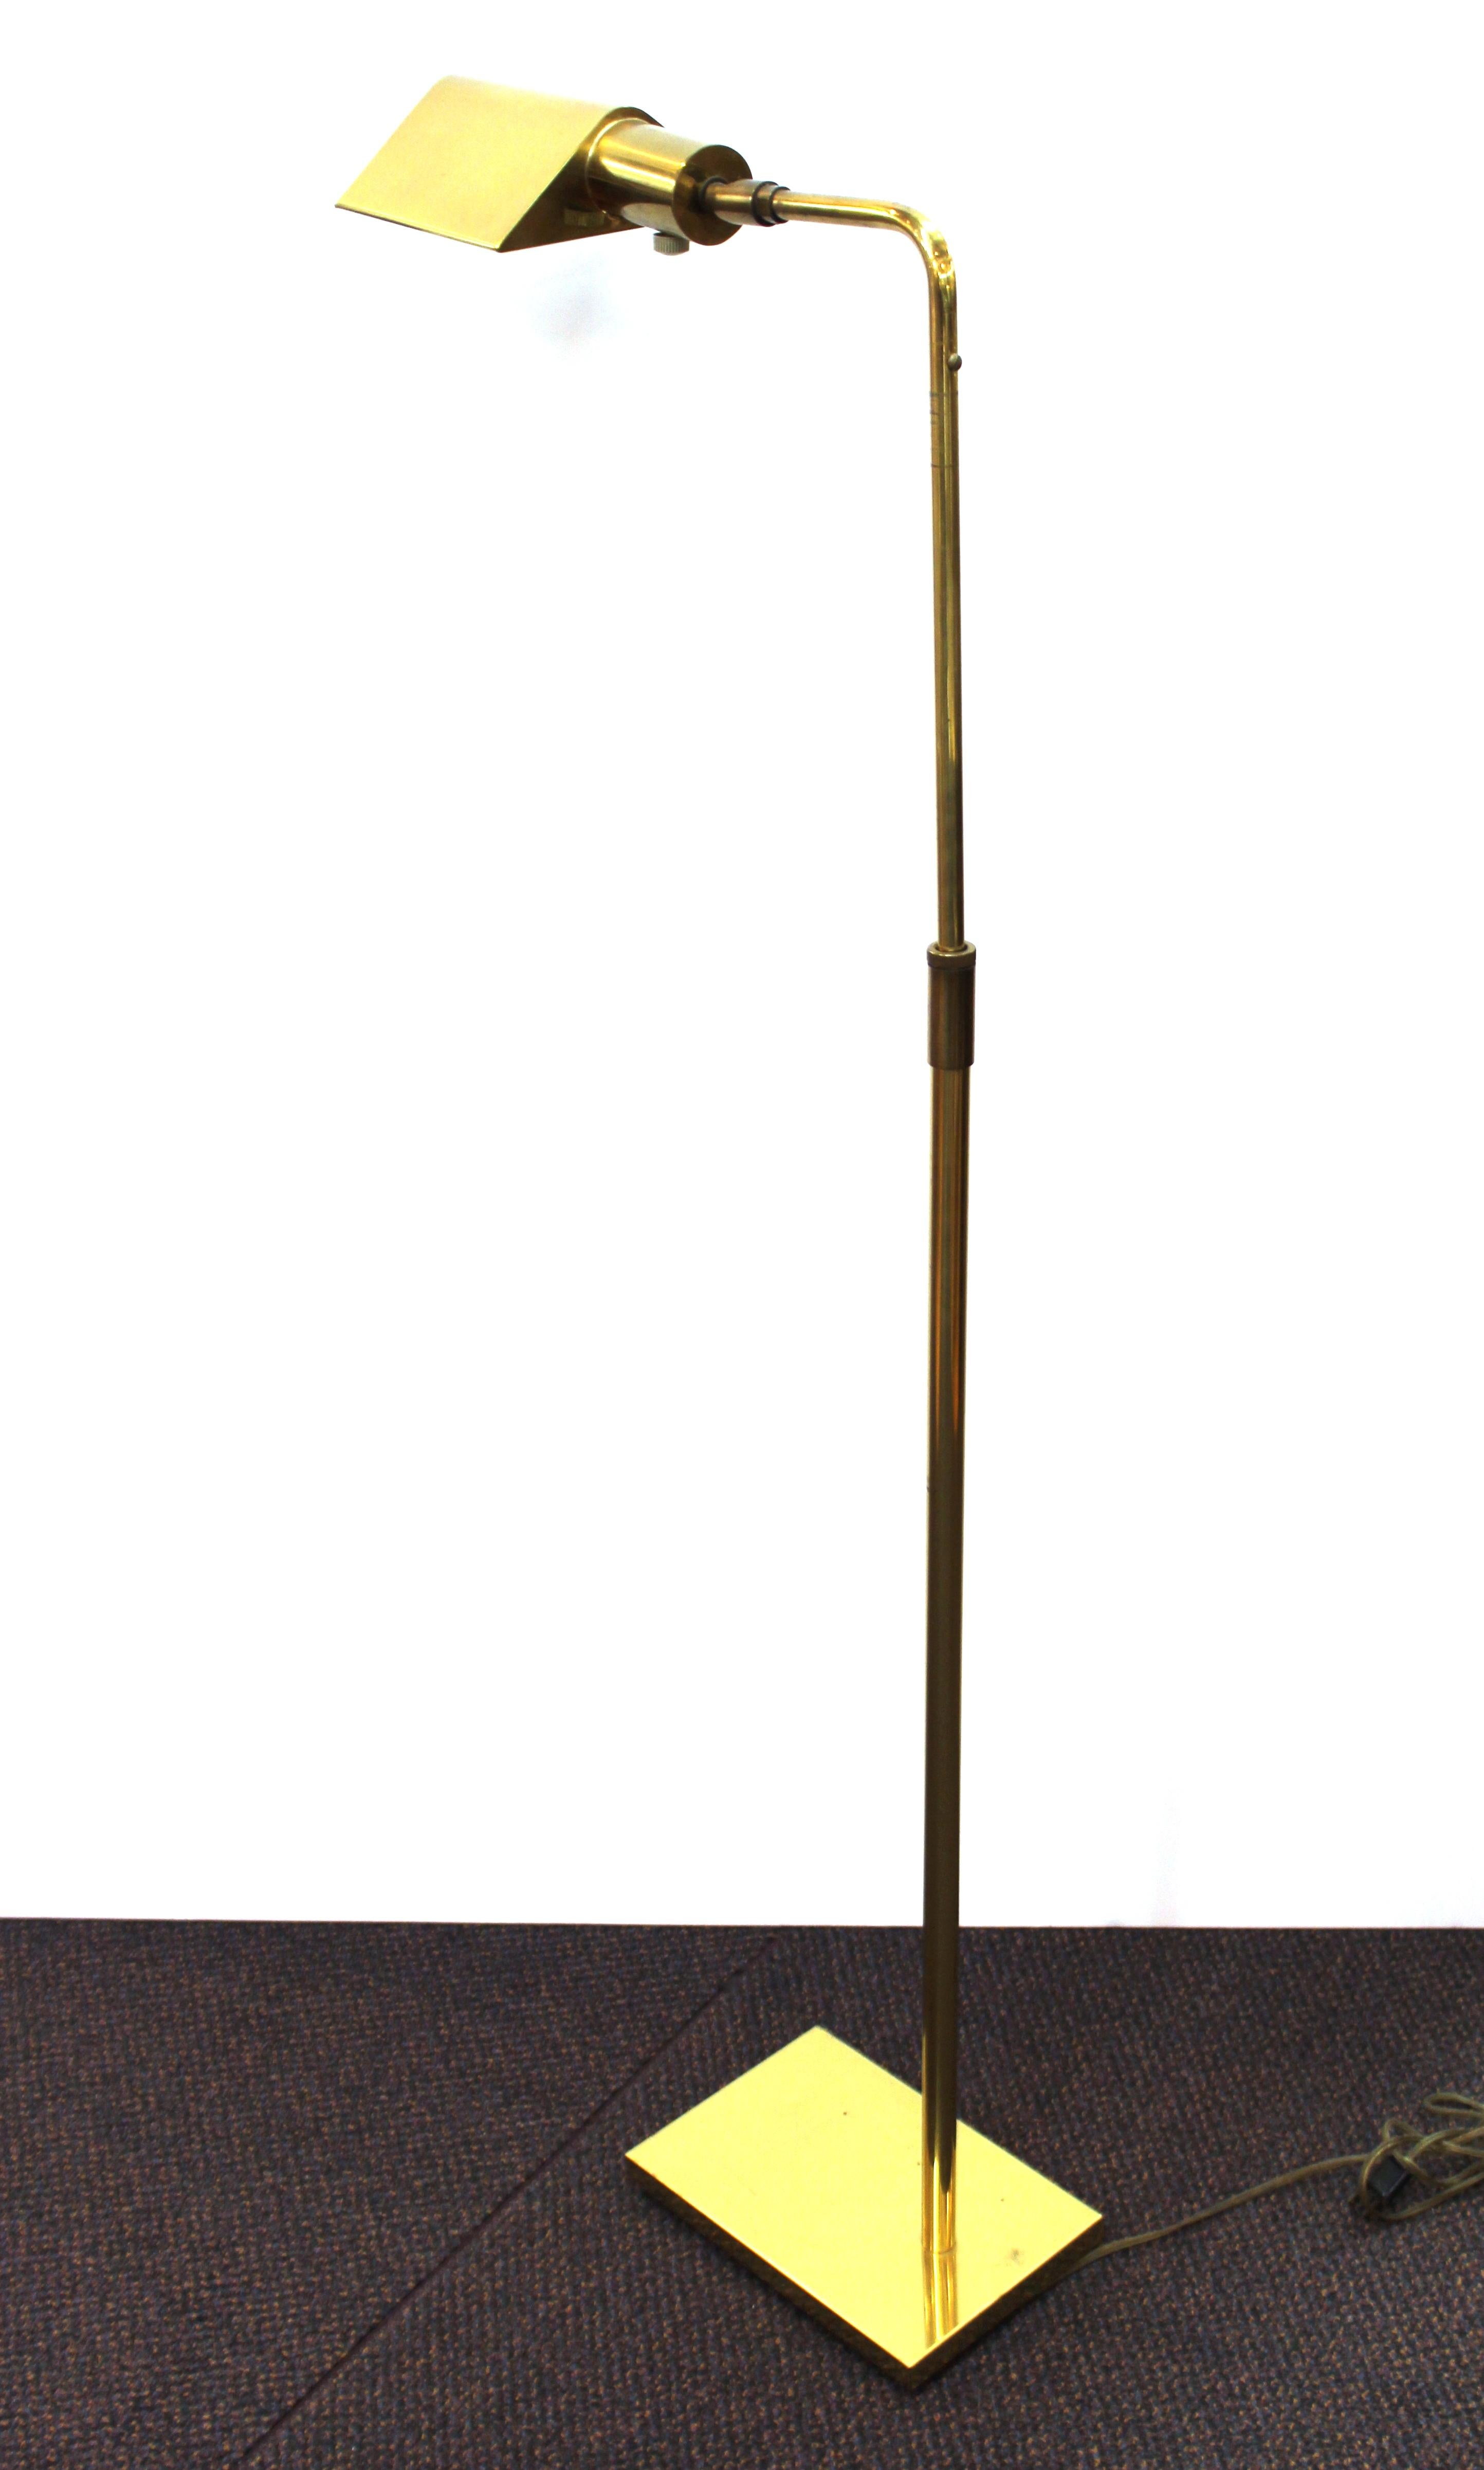 Mid-Century Modern adjustable pharmacy floor lamp in brass, made by Koch & Lowy in the United States during the 1960s. The piece is in great vintage condition with some minor age-appropriate wear. Stamped on the upper neck 'Koch & Lowy'.